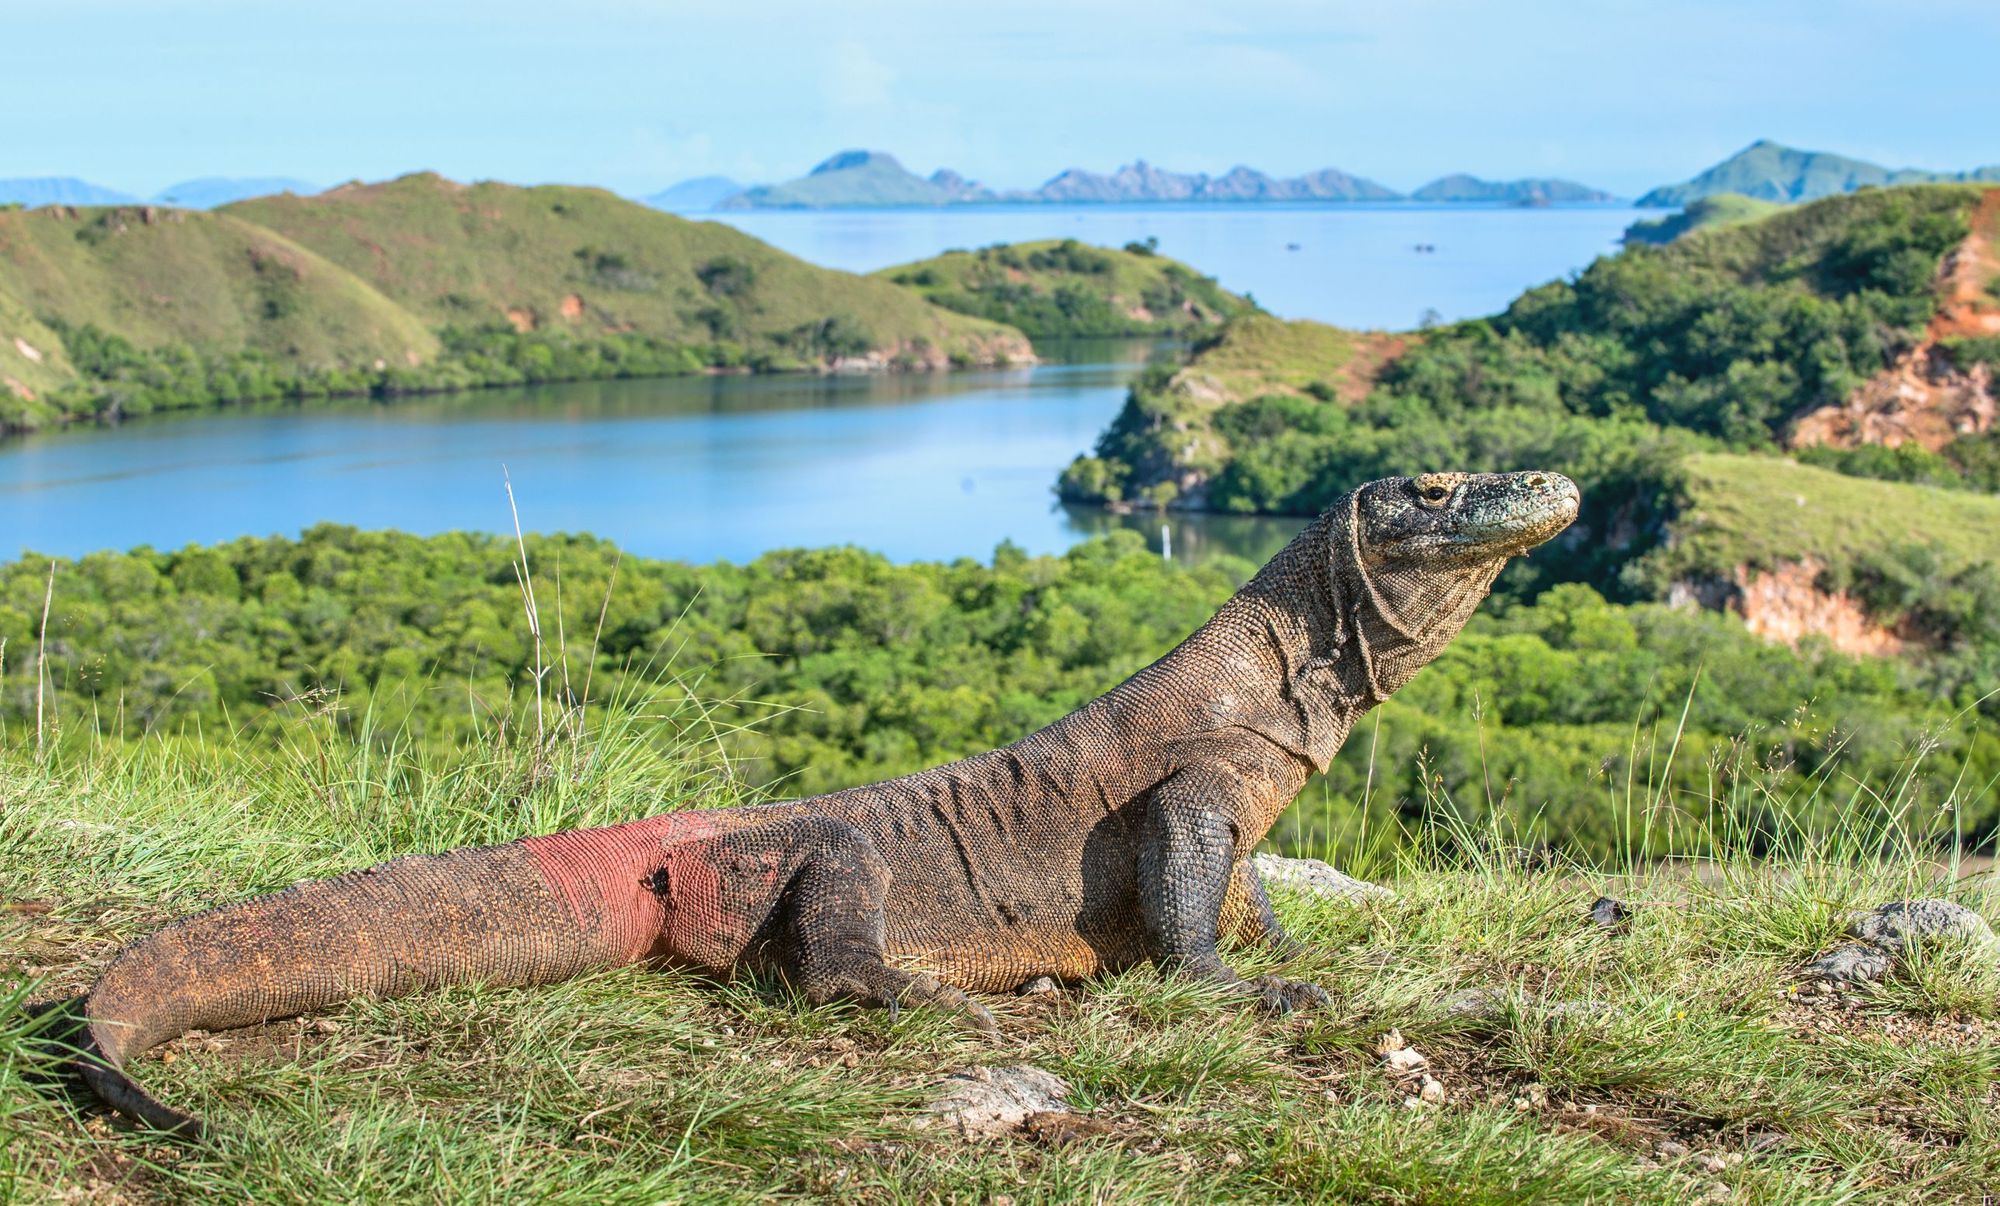 The Komodo dragon (Varanus komodoensis) in its natural habitat in Indonesia. This is the biggest living lizard in the world. Photo: Getty